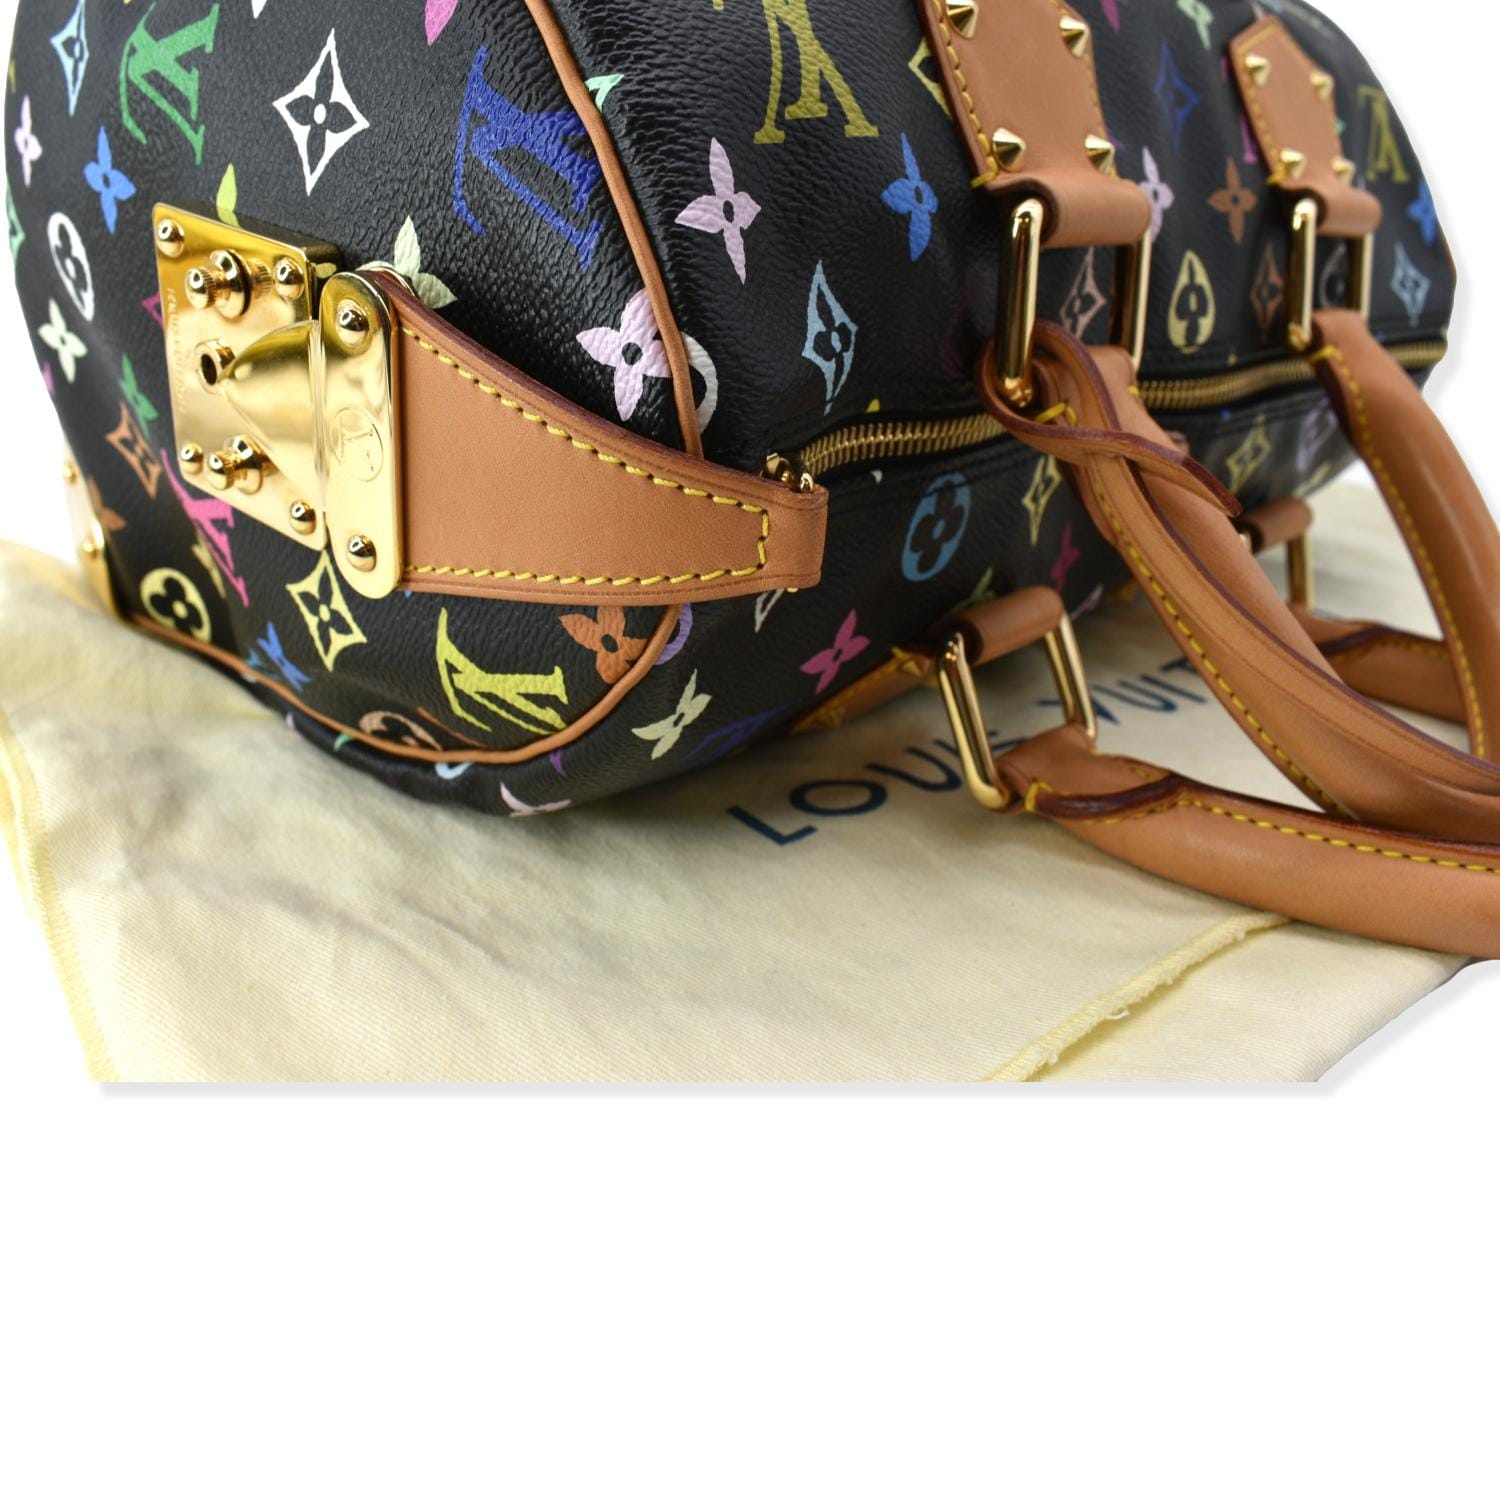 Bag of The Week: Hand painted Louis Vuitton Speedy 30